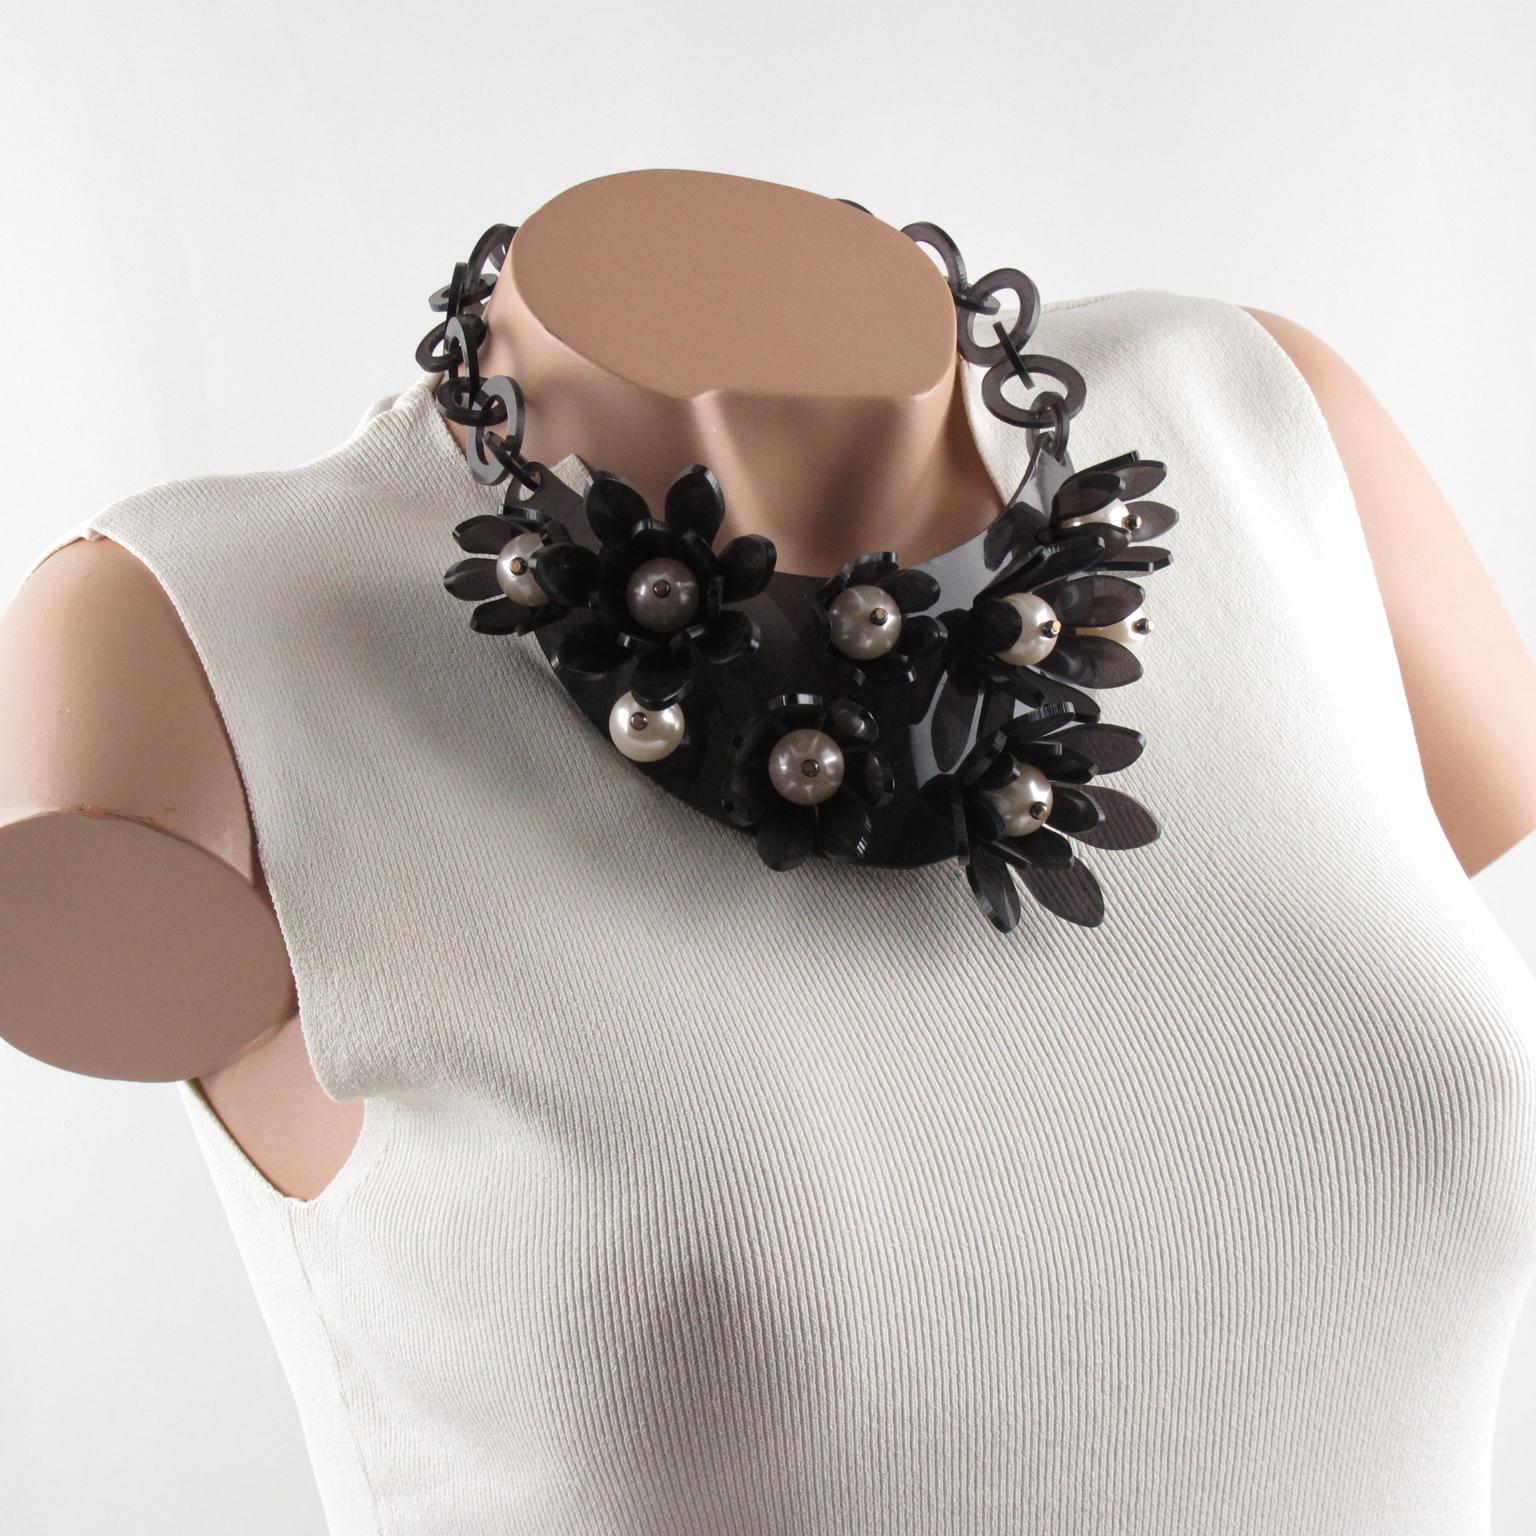 This impressive transparent dark gray Lucite or Plexiglass bib choker necklace was crafted by Italian designer Manoa2 (Milano 1980 - 1985). The collar shape has a large curved bib topped with dimensional flowers and huge pearl-like beads. The